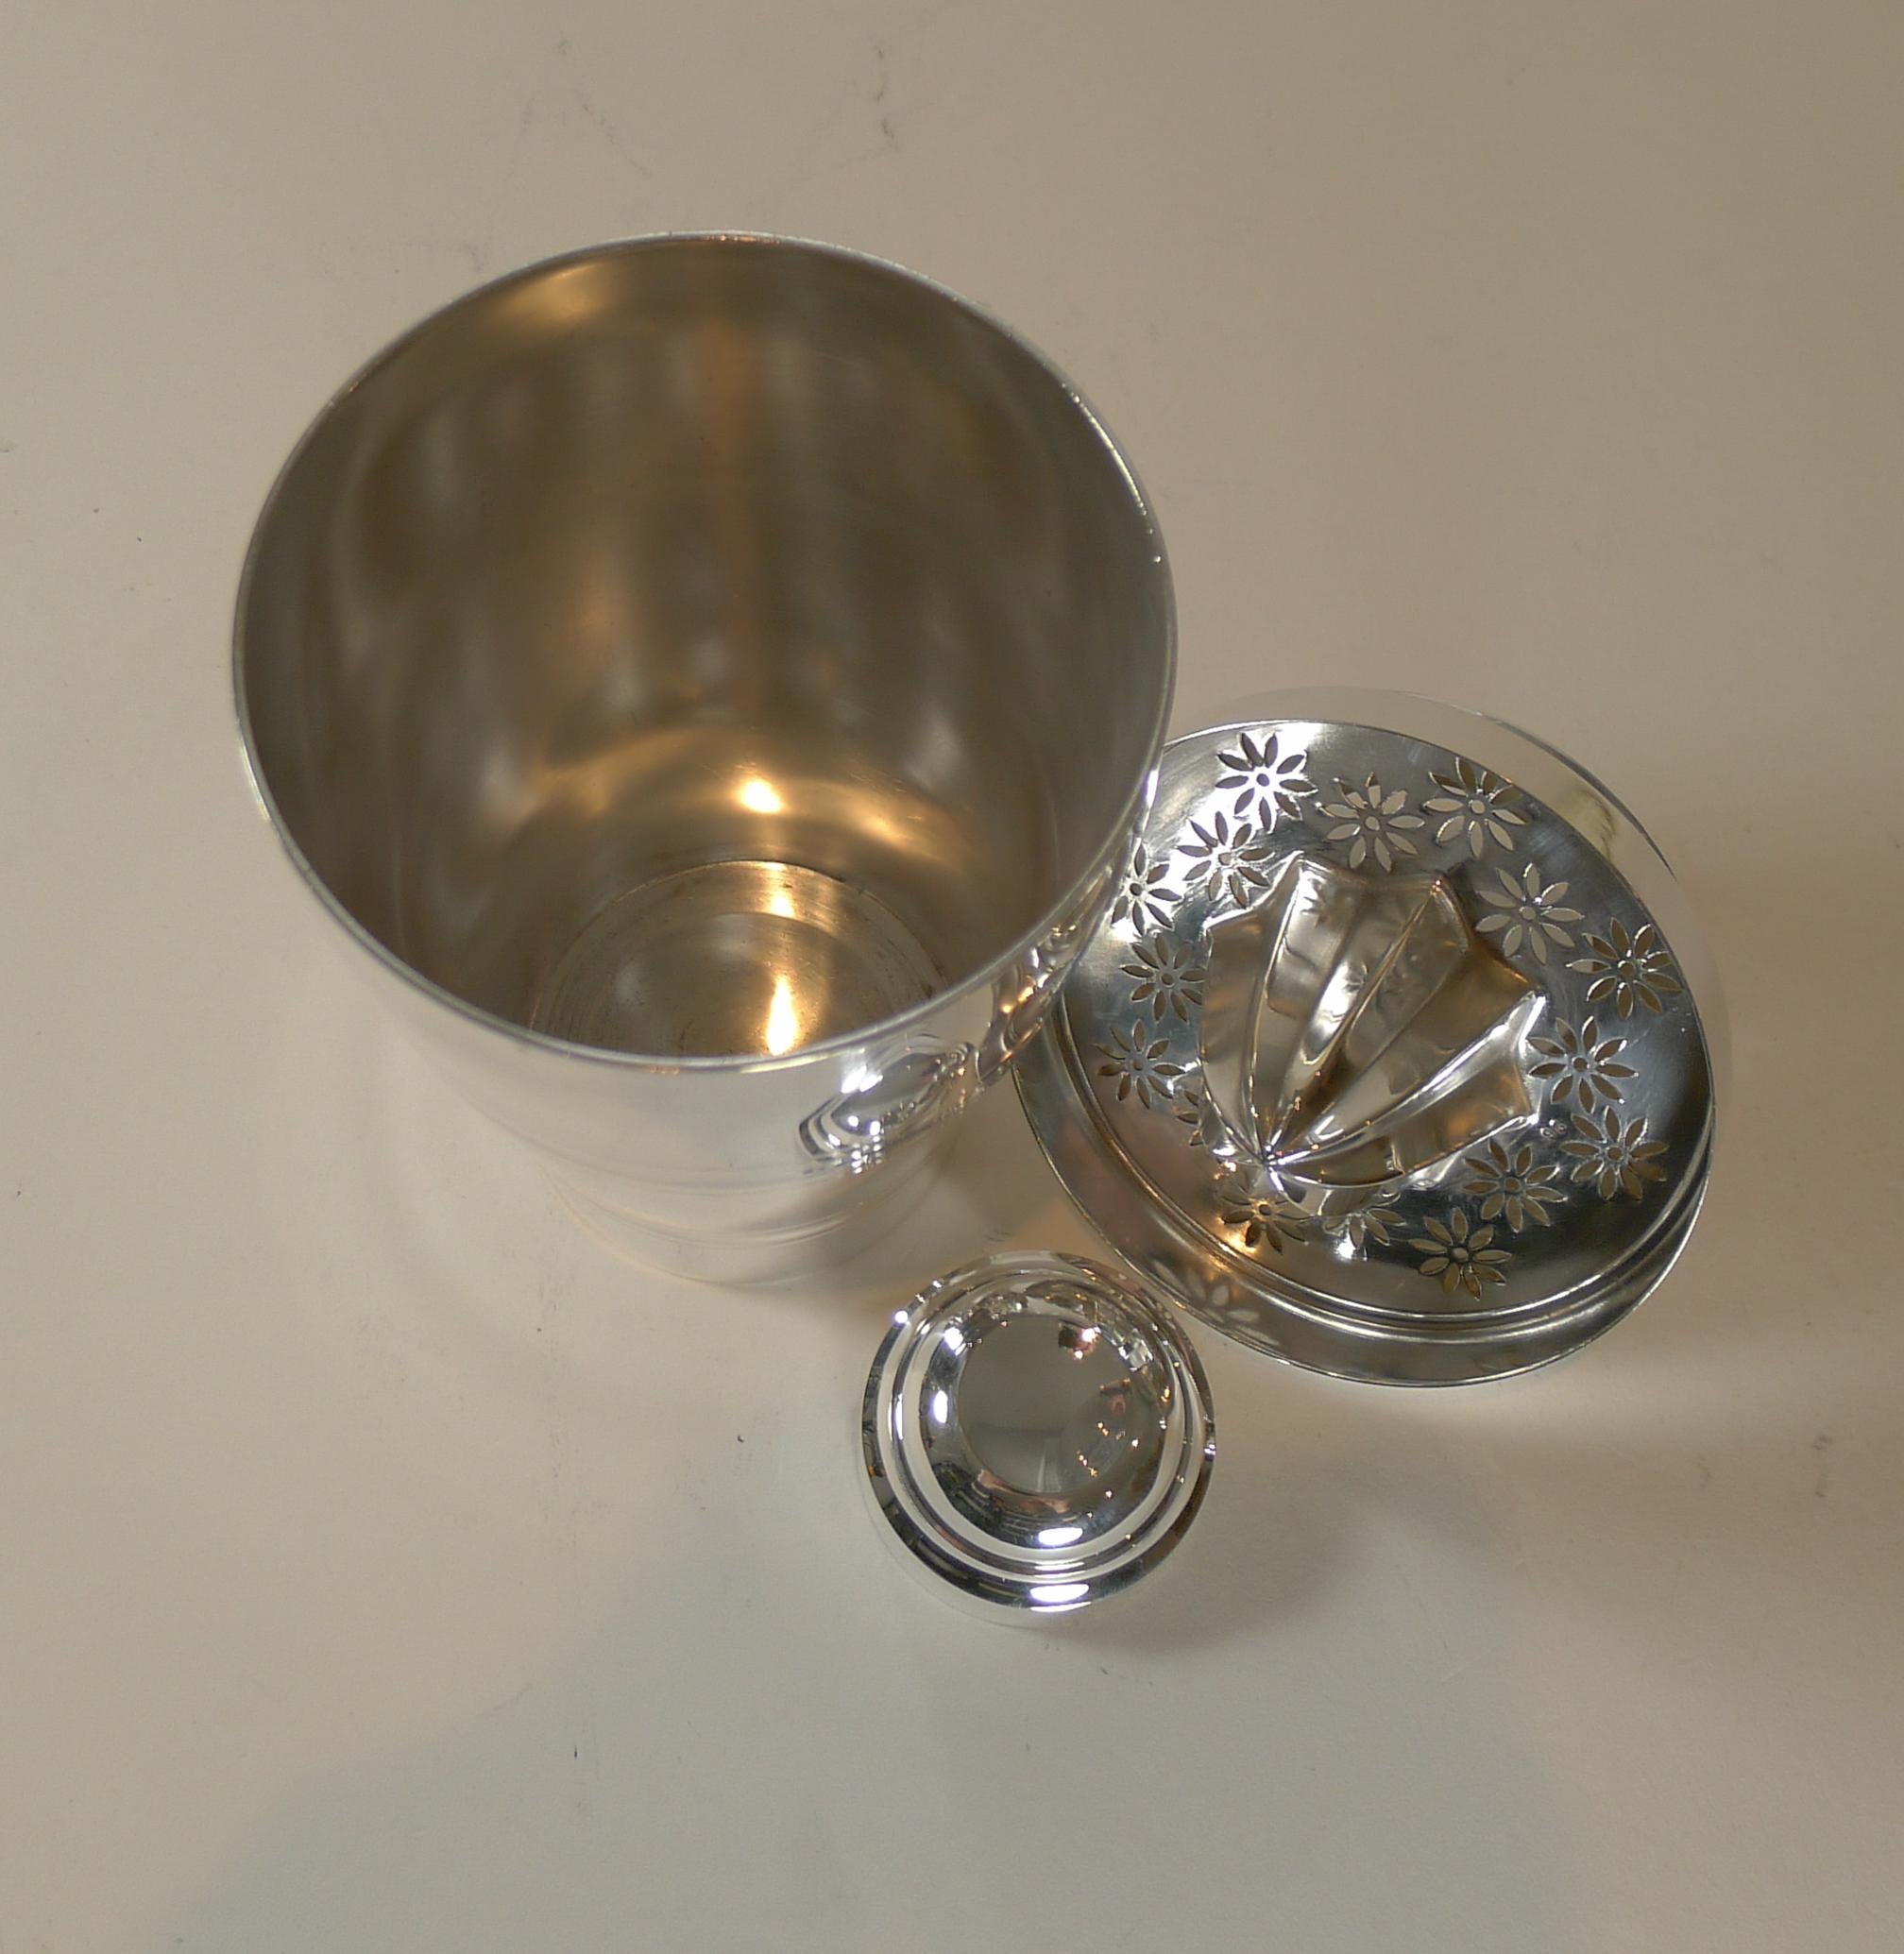 French Art Deco Cocktail Shaker with Lemon Reamer c.1930 by St. Medard, Paris For Sale 5